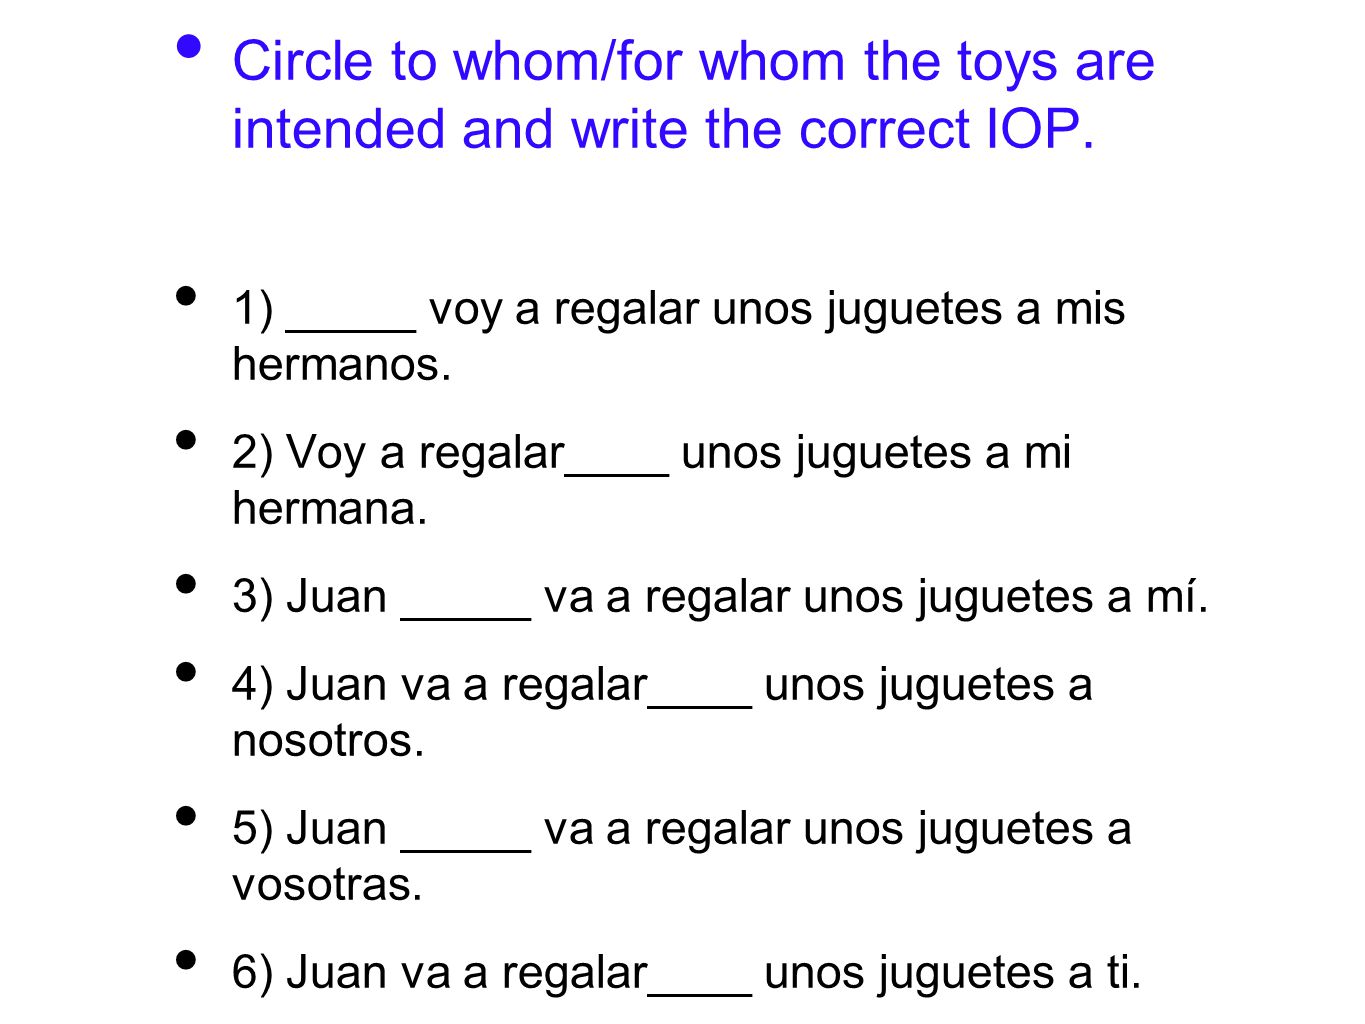 Circle to whom/for whom the toys are intended and write the correct IOP.